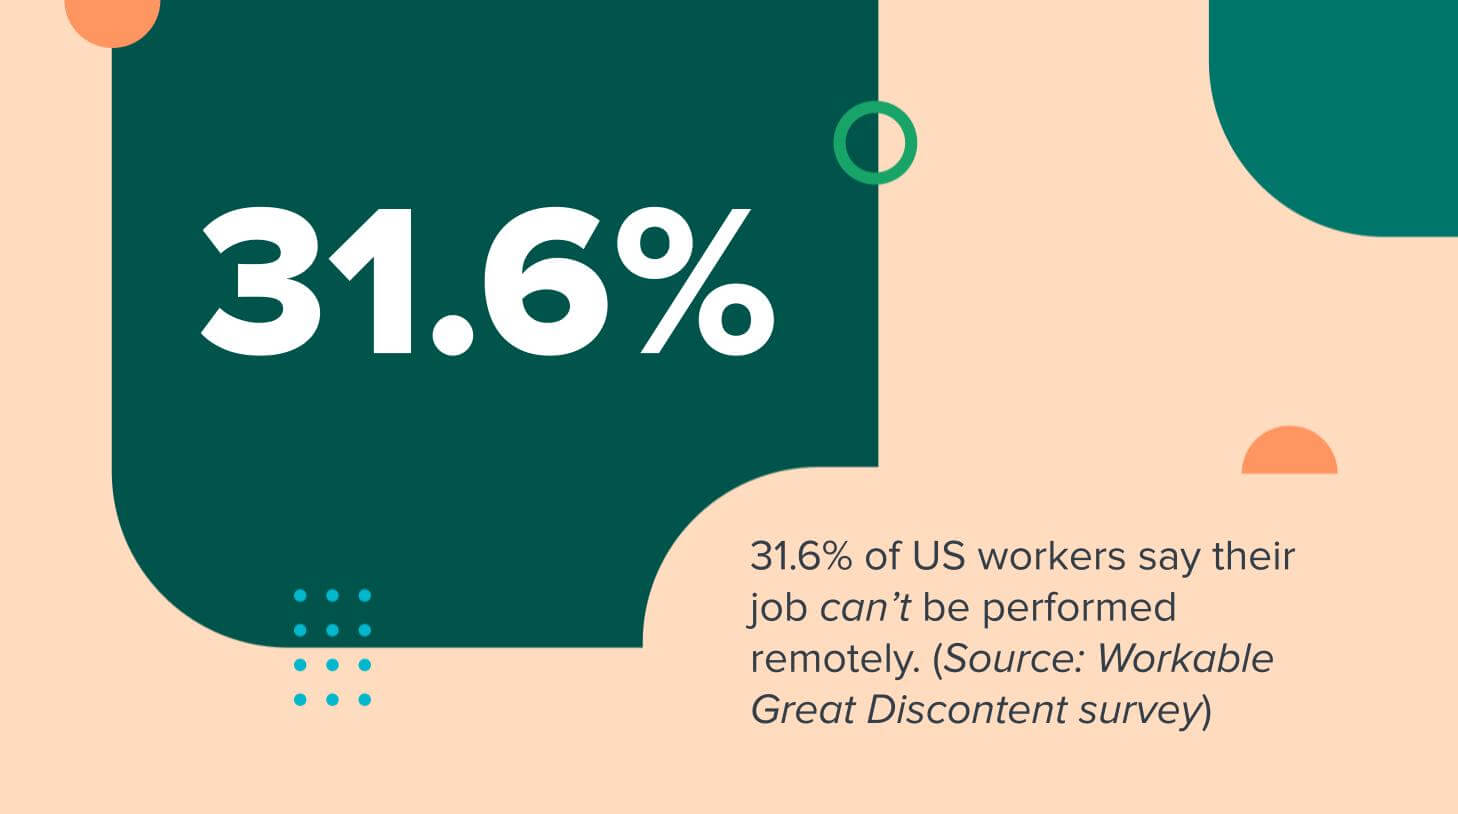 31.6% of US workers say their job can’t be performed remotely. (Source: Workable Great Discontent survey)